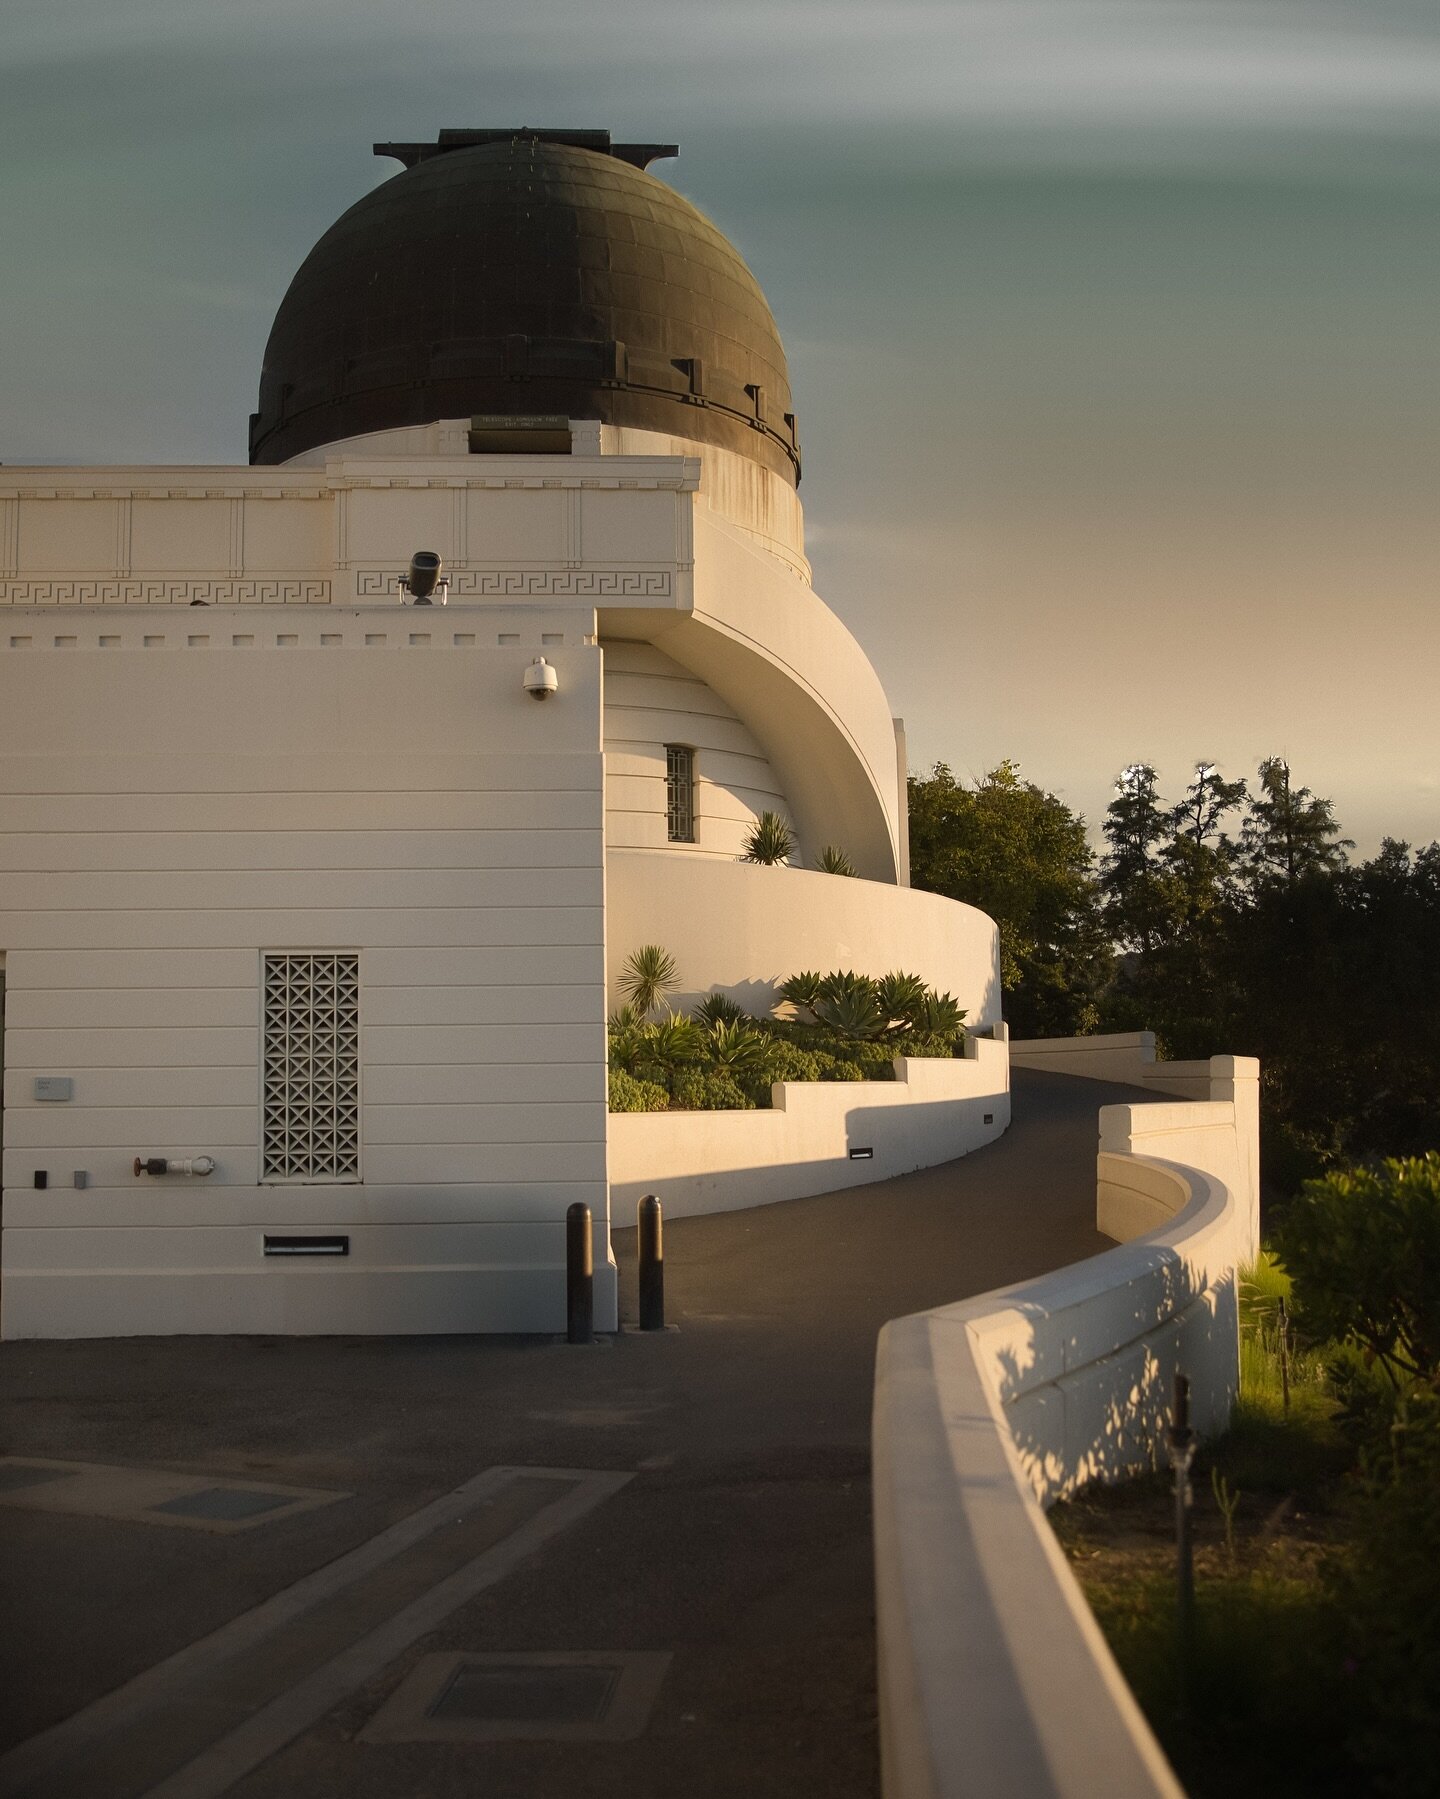 Chasing sunrises and silhouettes at Griffith Observatory. Share your go-to sunrise or sunset spot! Let the sunset symphony begin. 

🎶 #GoldenHourMagic #GriffithObservatory #SunsetChaser #photographers #edit #photography #jarinv #canon